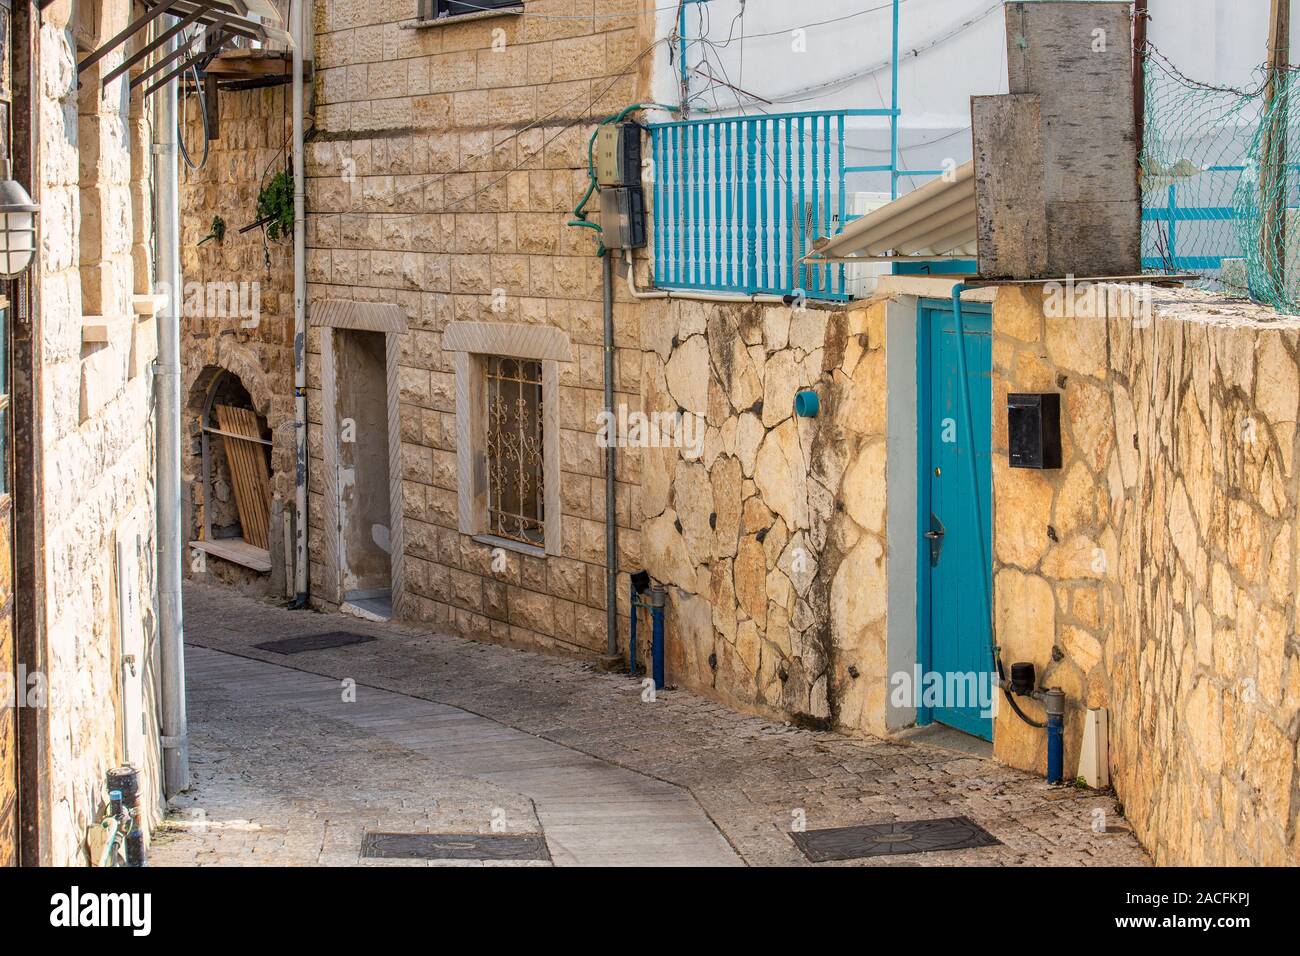 Blue streets of Holy city Safed, Israel. Stock Photo